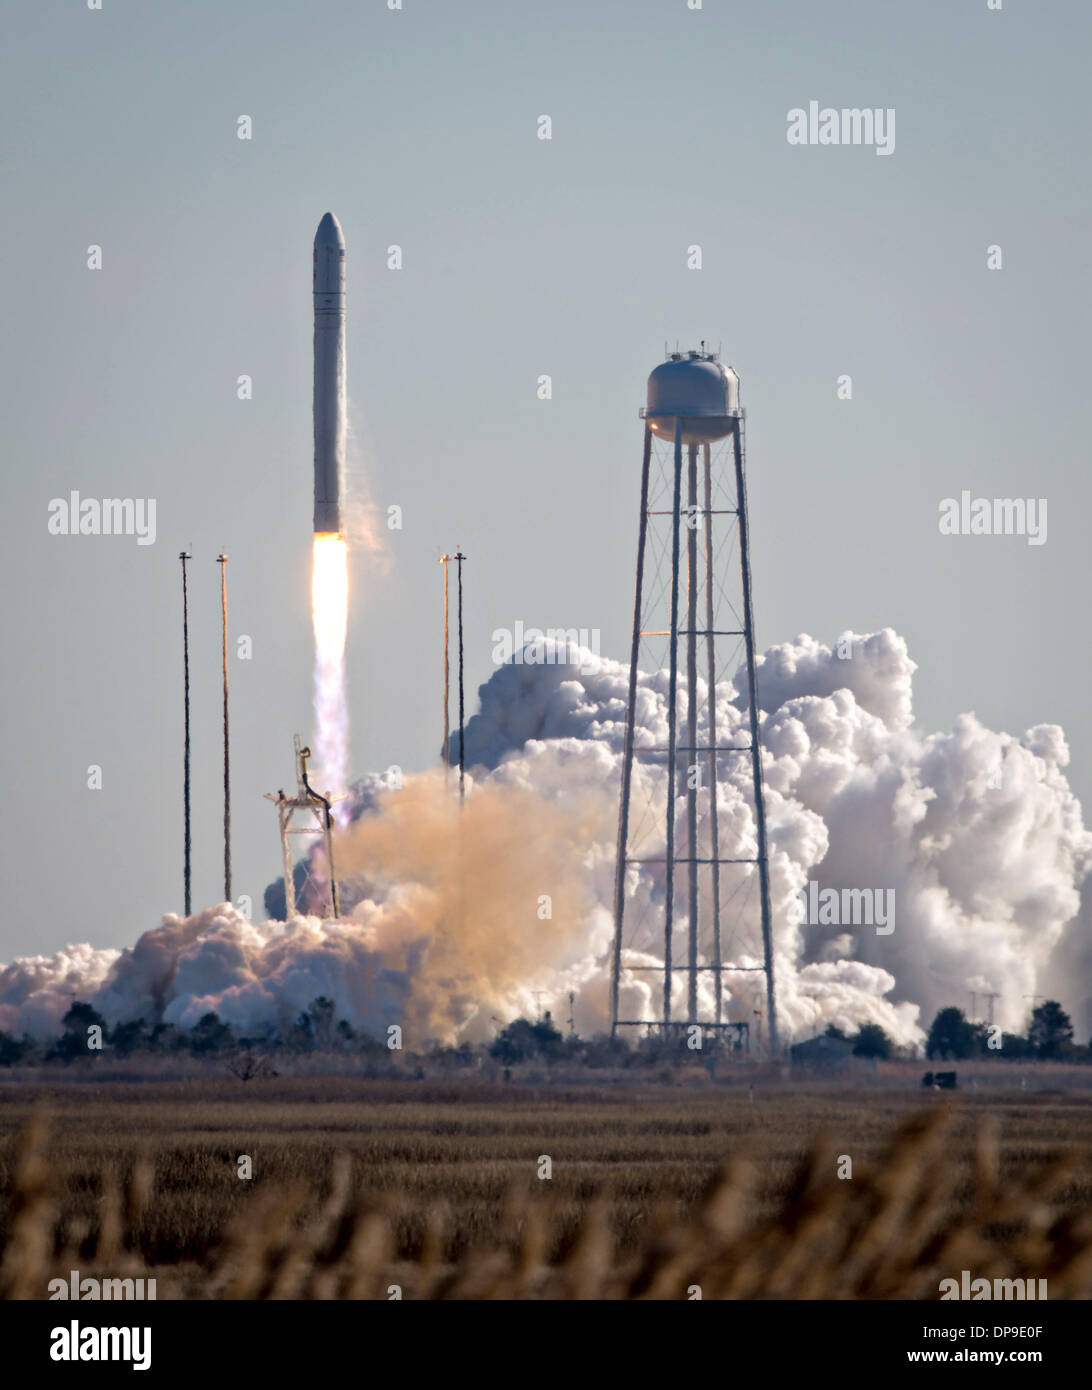 An Orbital Sciences Corporation Antares rocket launches from Pad-0A at NASA's Wallops Flight Facility January 9, 2014 in Wallops Island, VA. Antares is carrying the Cygnus spacecraft on a cargo resupply mission to the International Space Station. Stock Photo